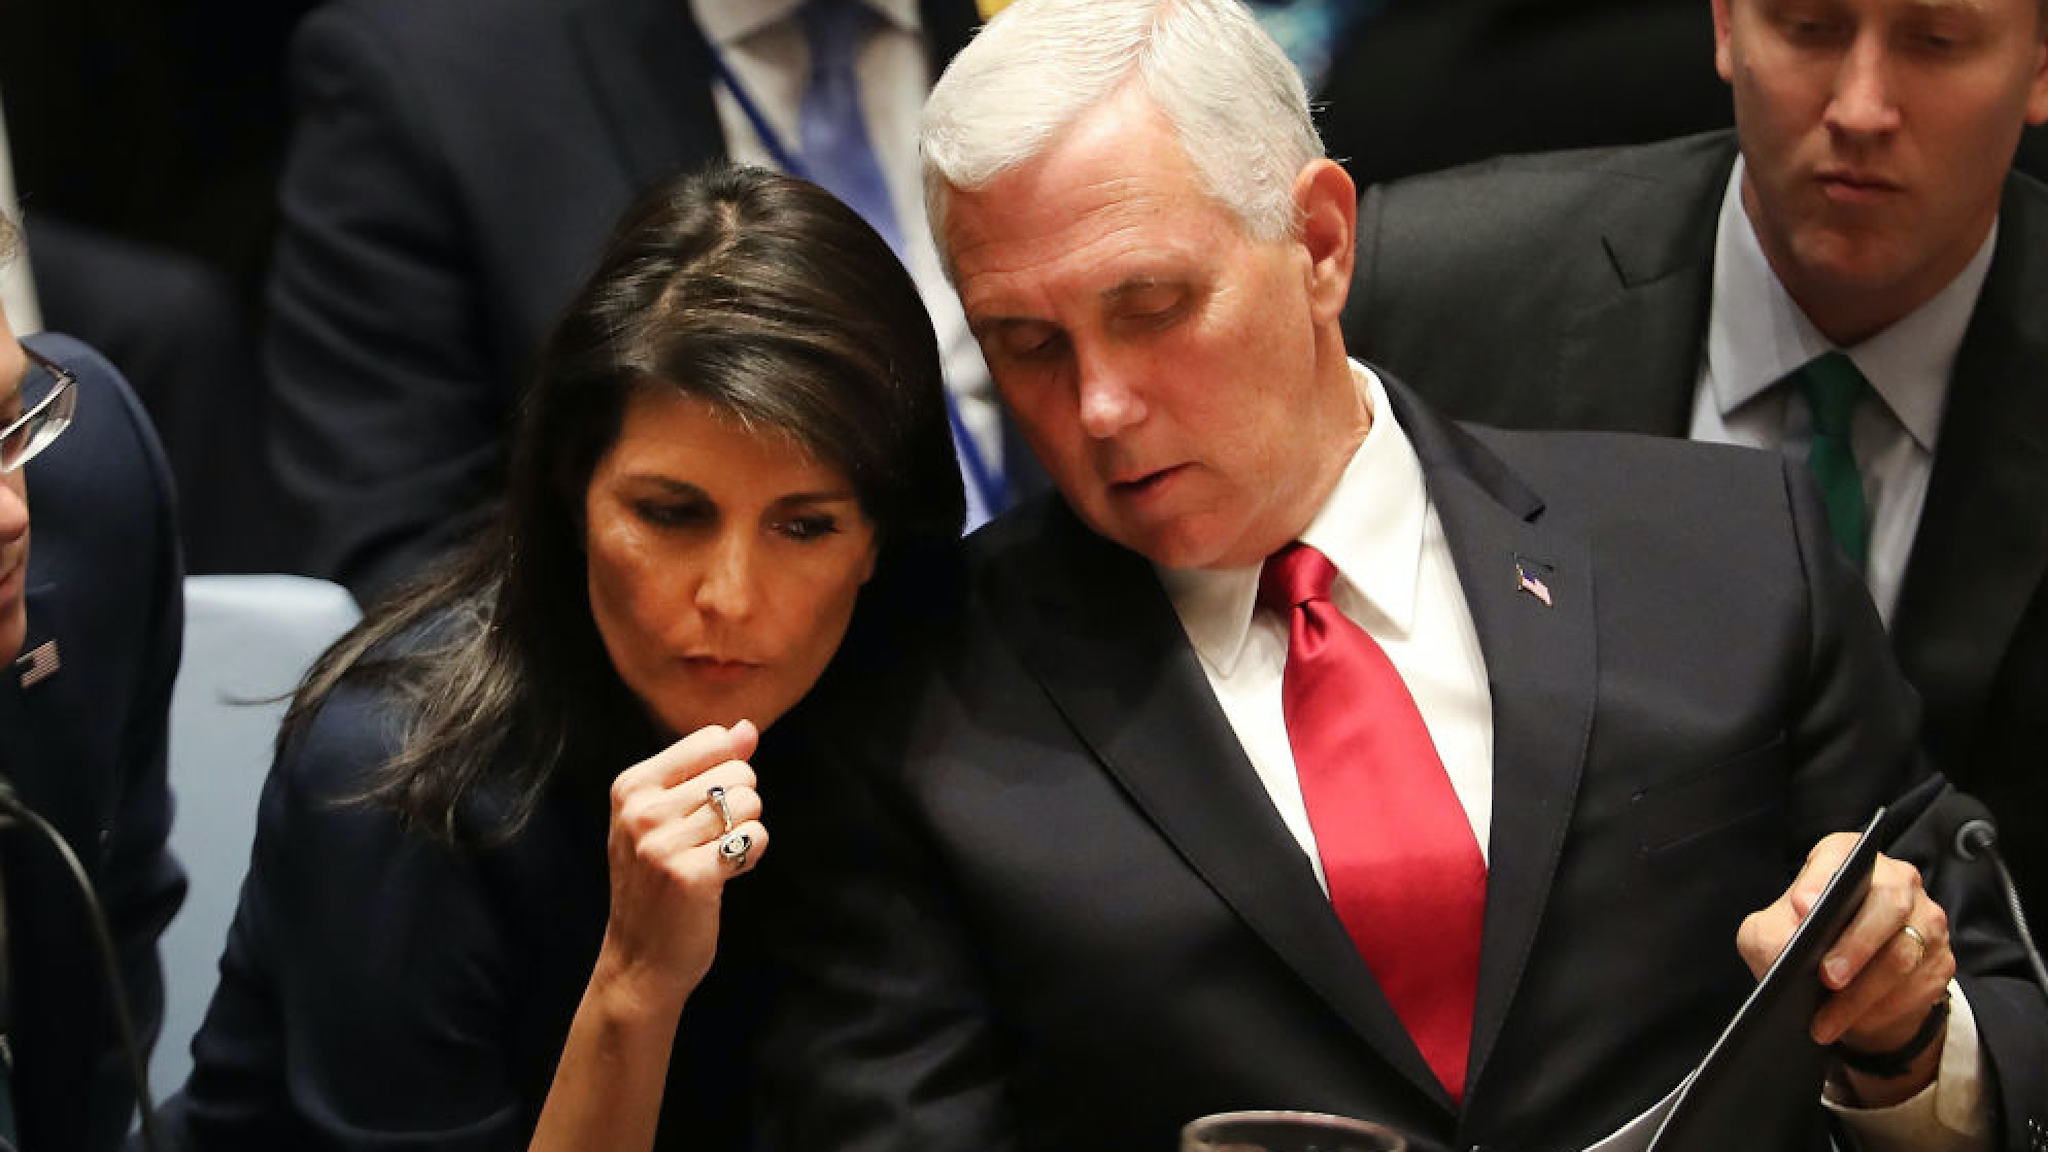 U.S. Vice President Mike Pence confers with U.S. Ambassador to the United Nations (U.N) Nikki Haley at a Security Council meeting during the 72nd U.N. General Assembly at U.N. headquarters on September 20, 2017 in New York City.